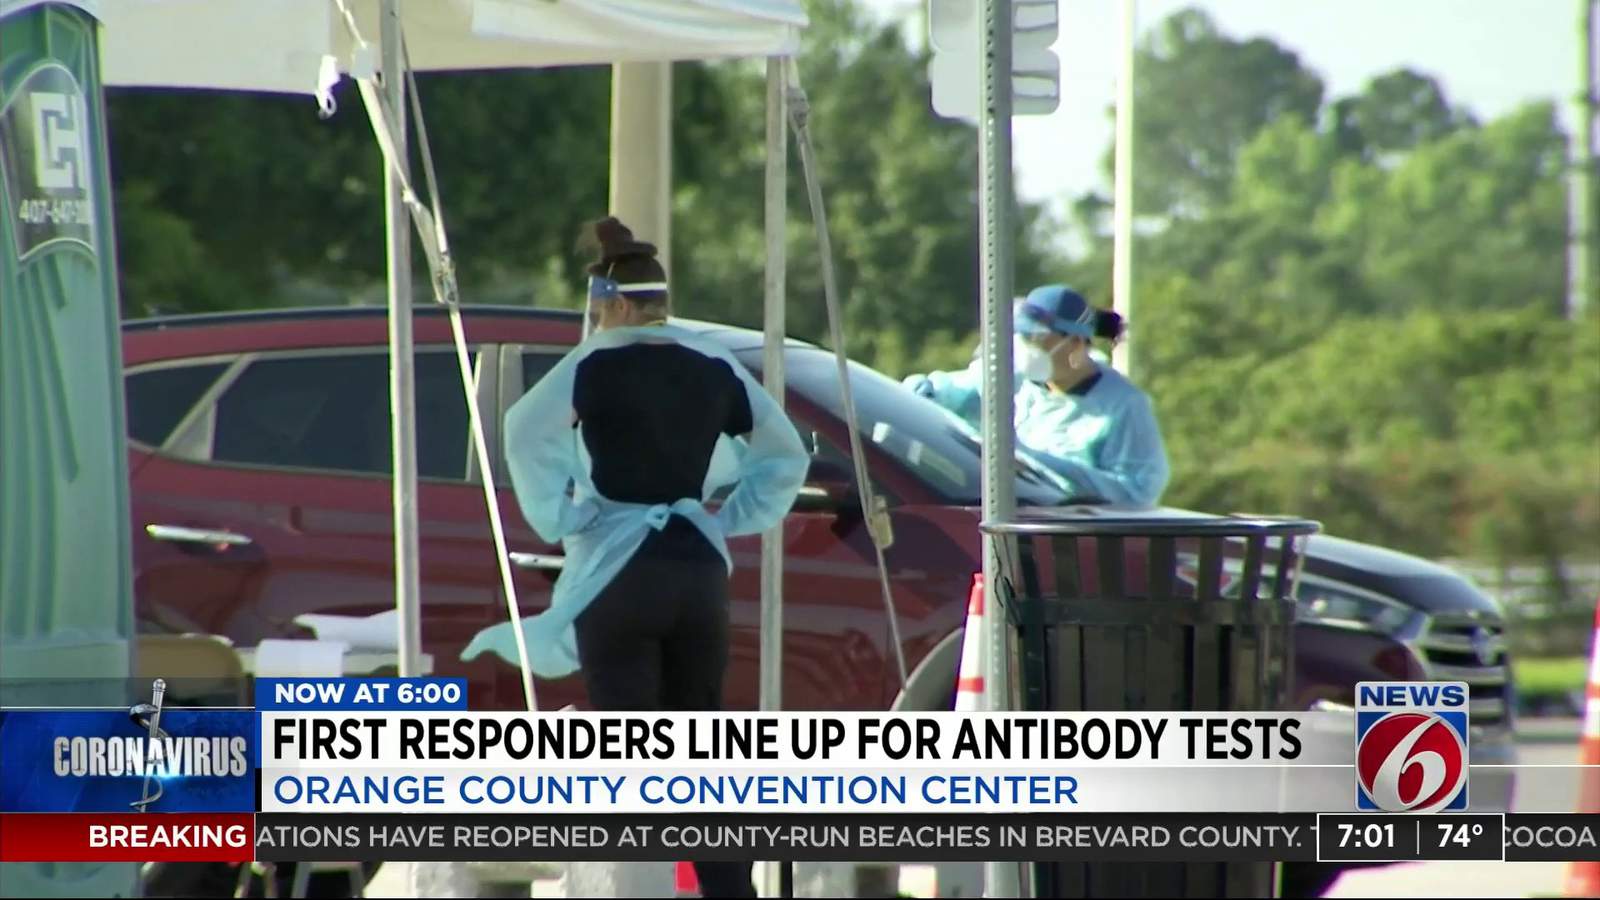 First responders line up for antibody tests